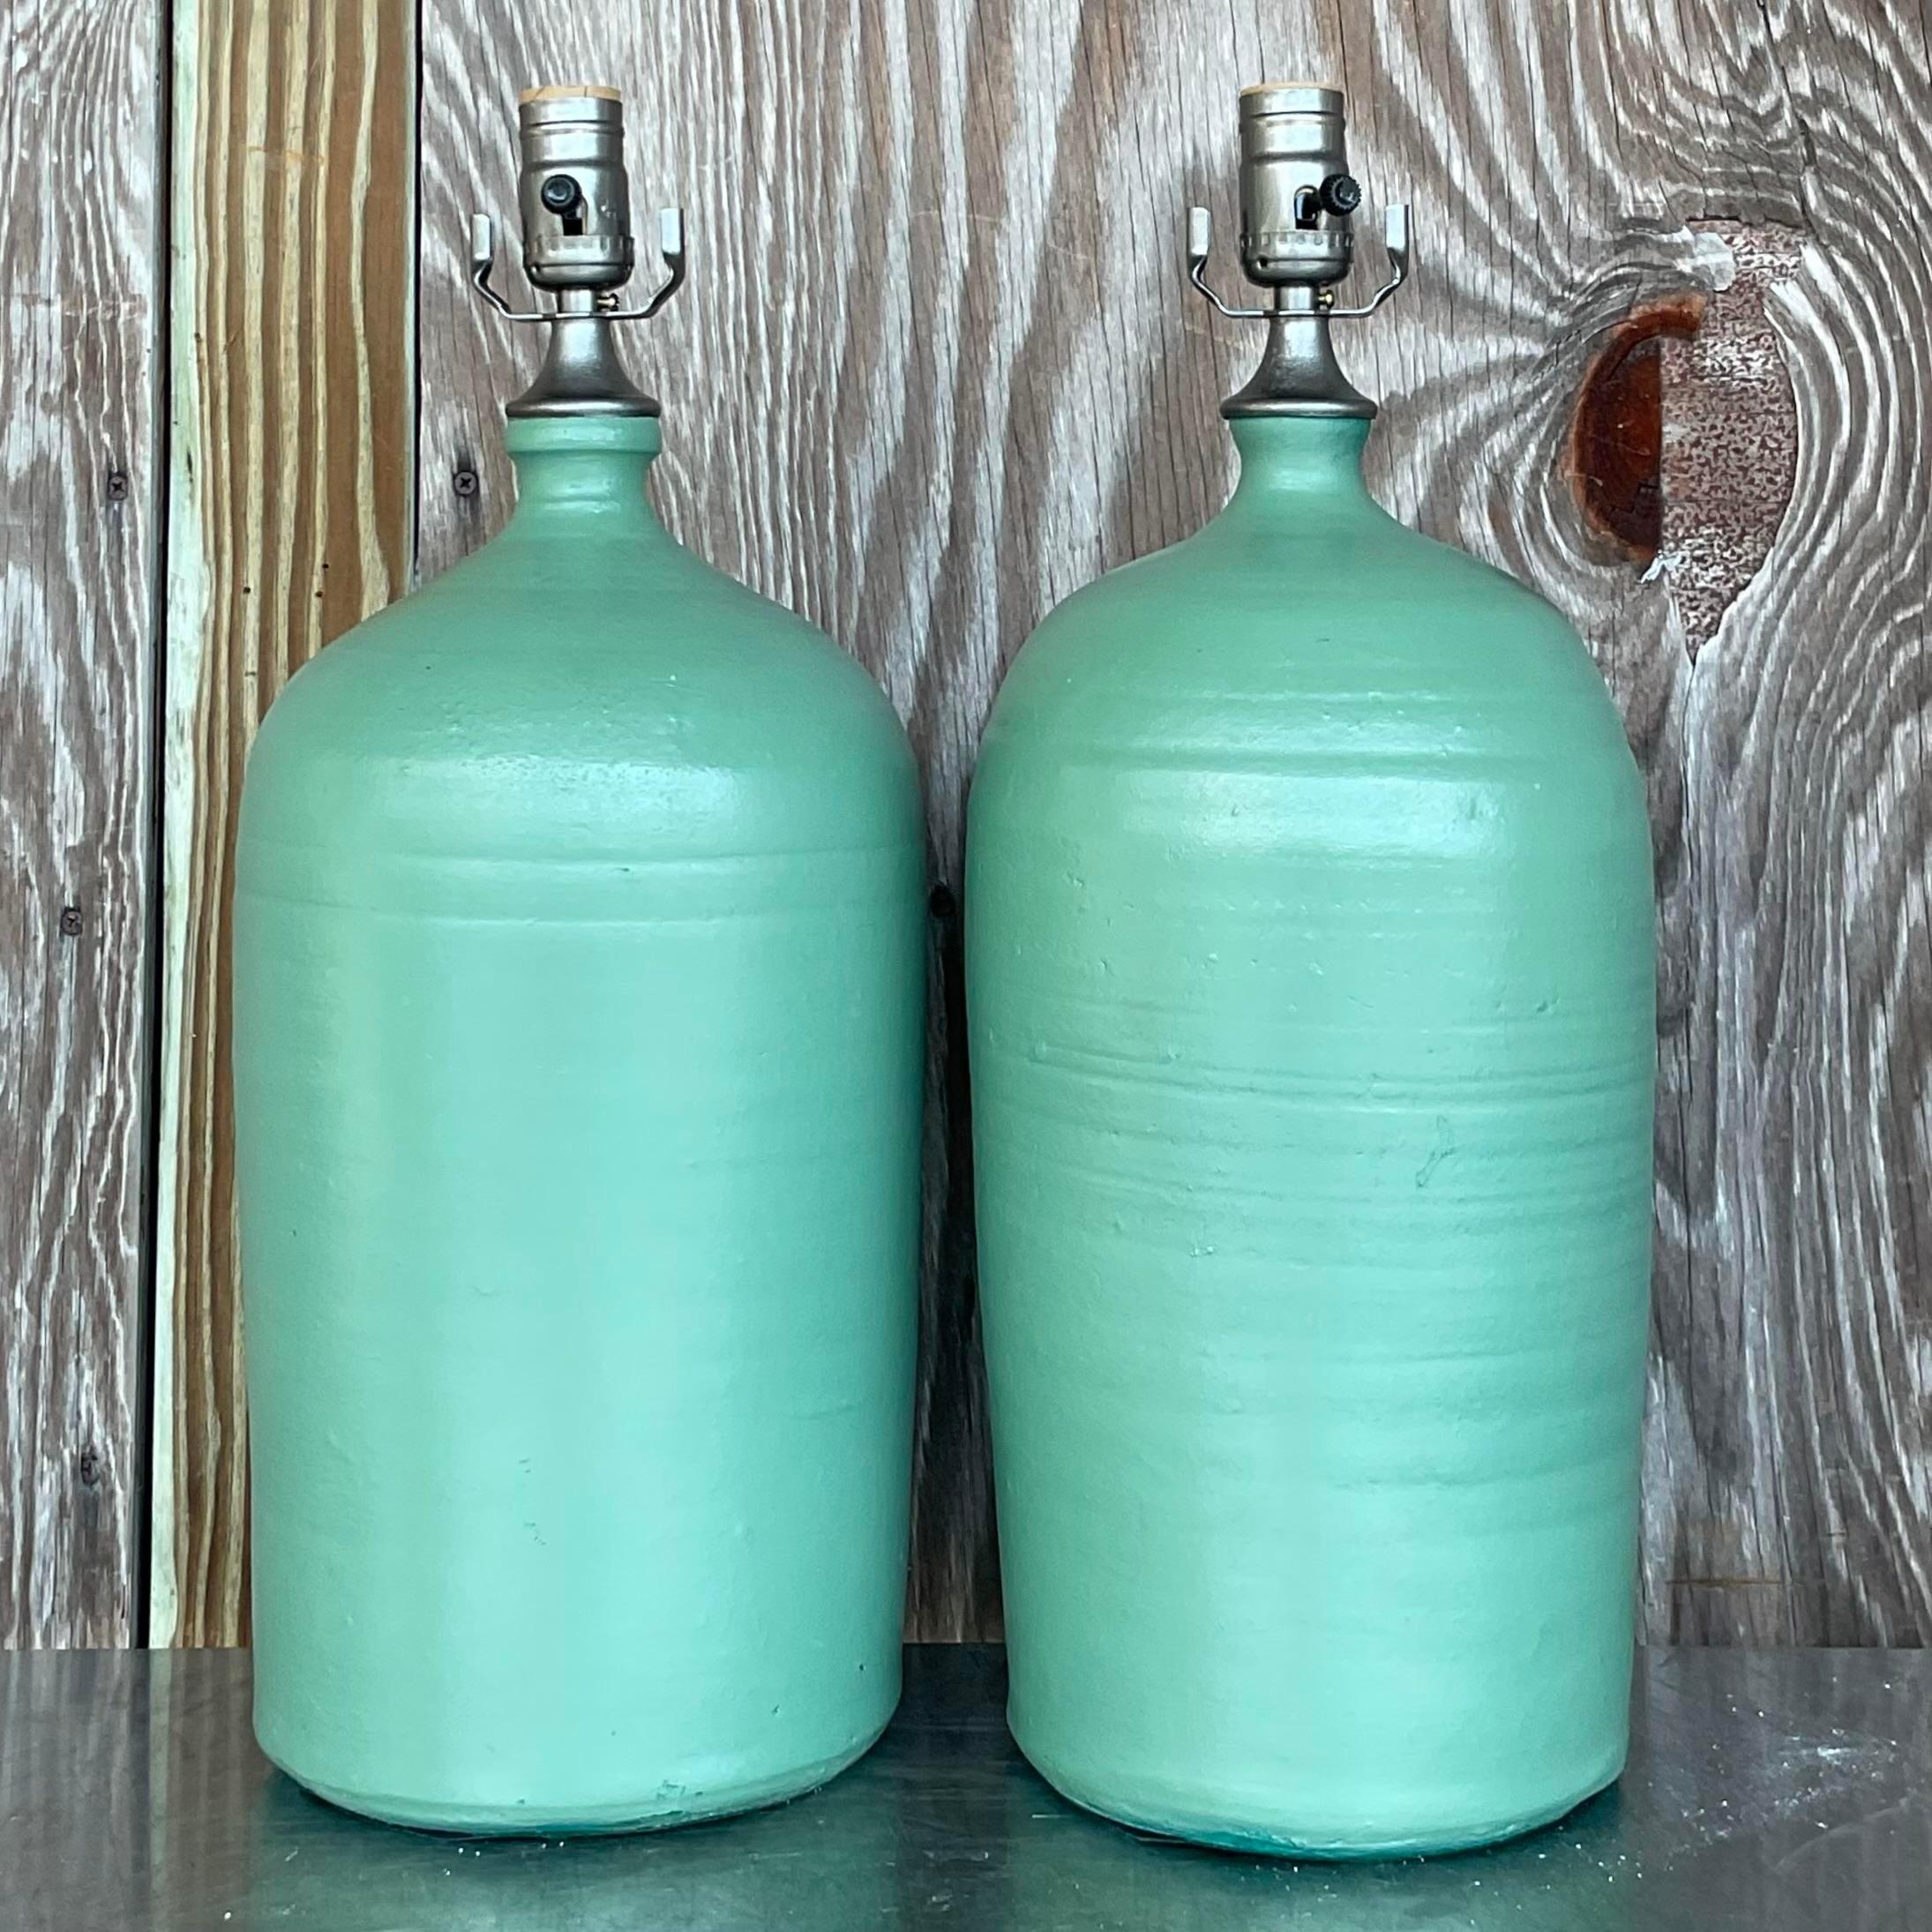 A fabulous pair of vintage Boho table lamps. Chic green studio pottery vessels in a matte glazed finish. Fully restored with all new wiring and hardware. Acquired from a Miami estate.